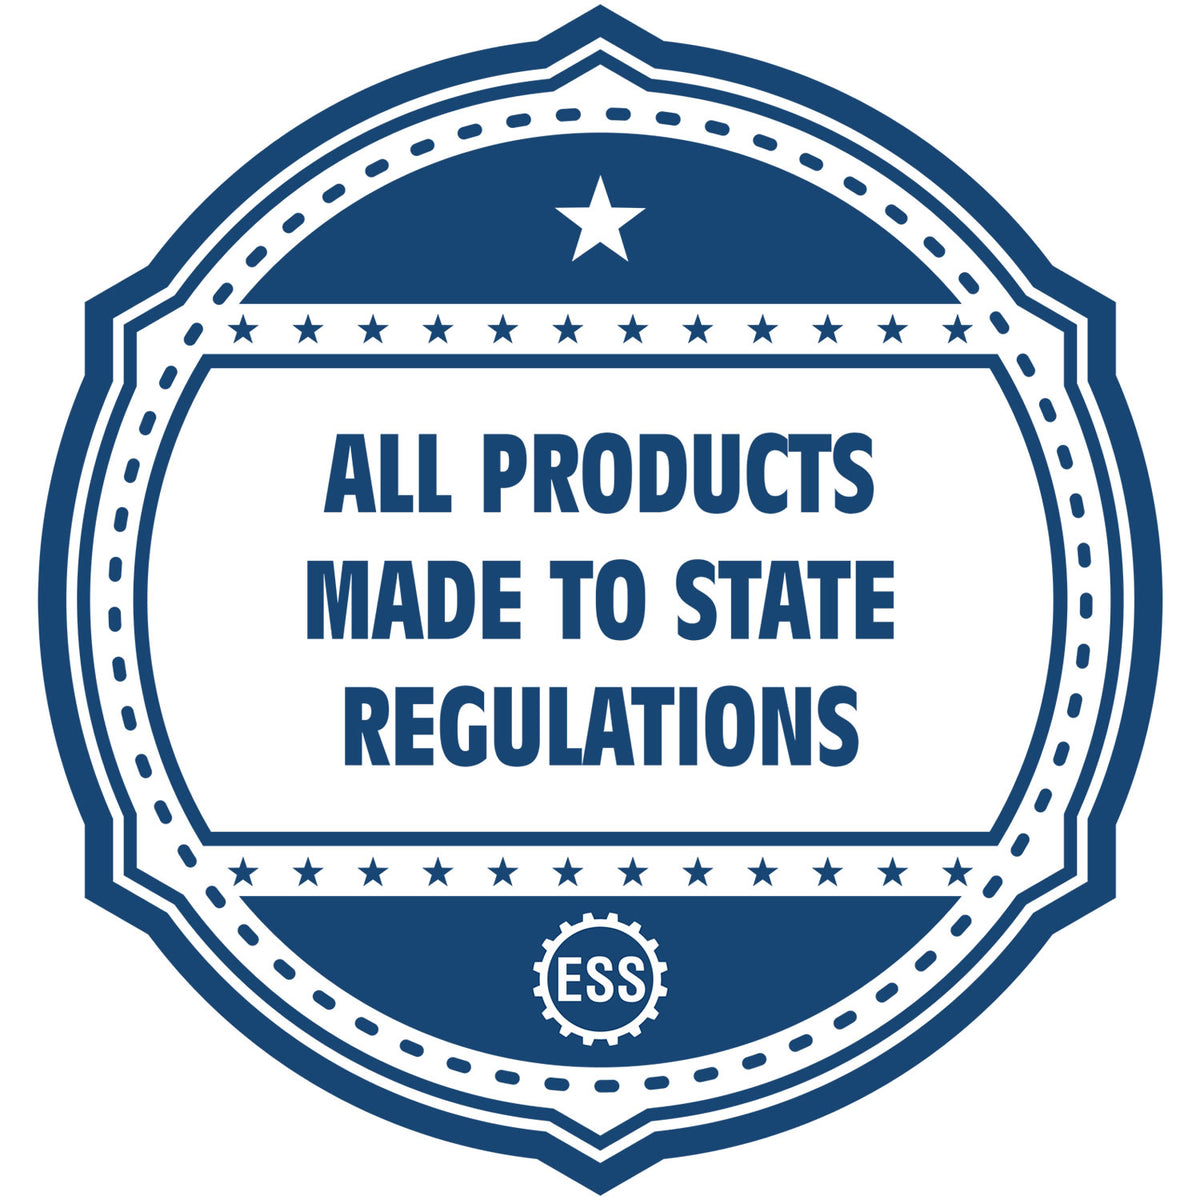 An icon or badge element for the Handheld Colorado Land Surveyor Seal showing that this product is made in compliance with state regulations.